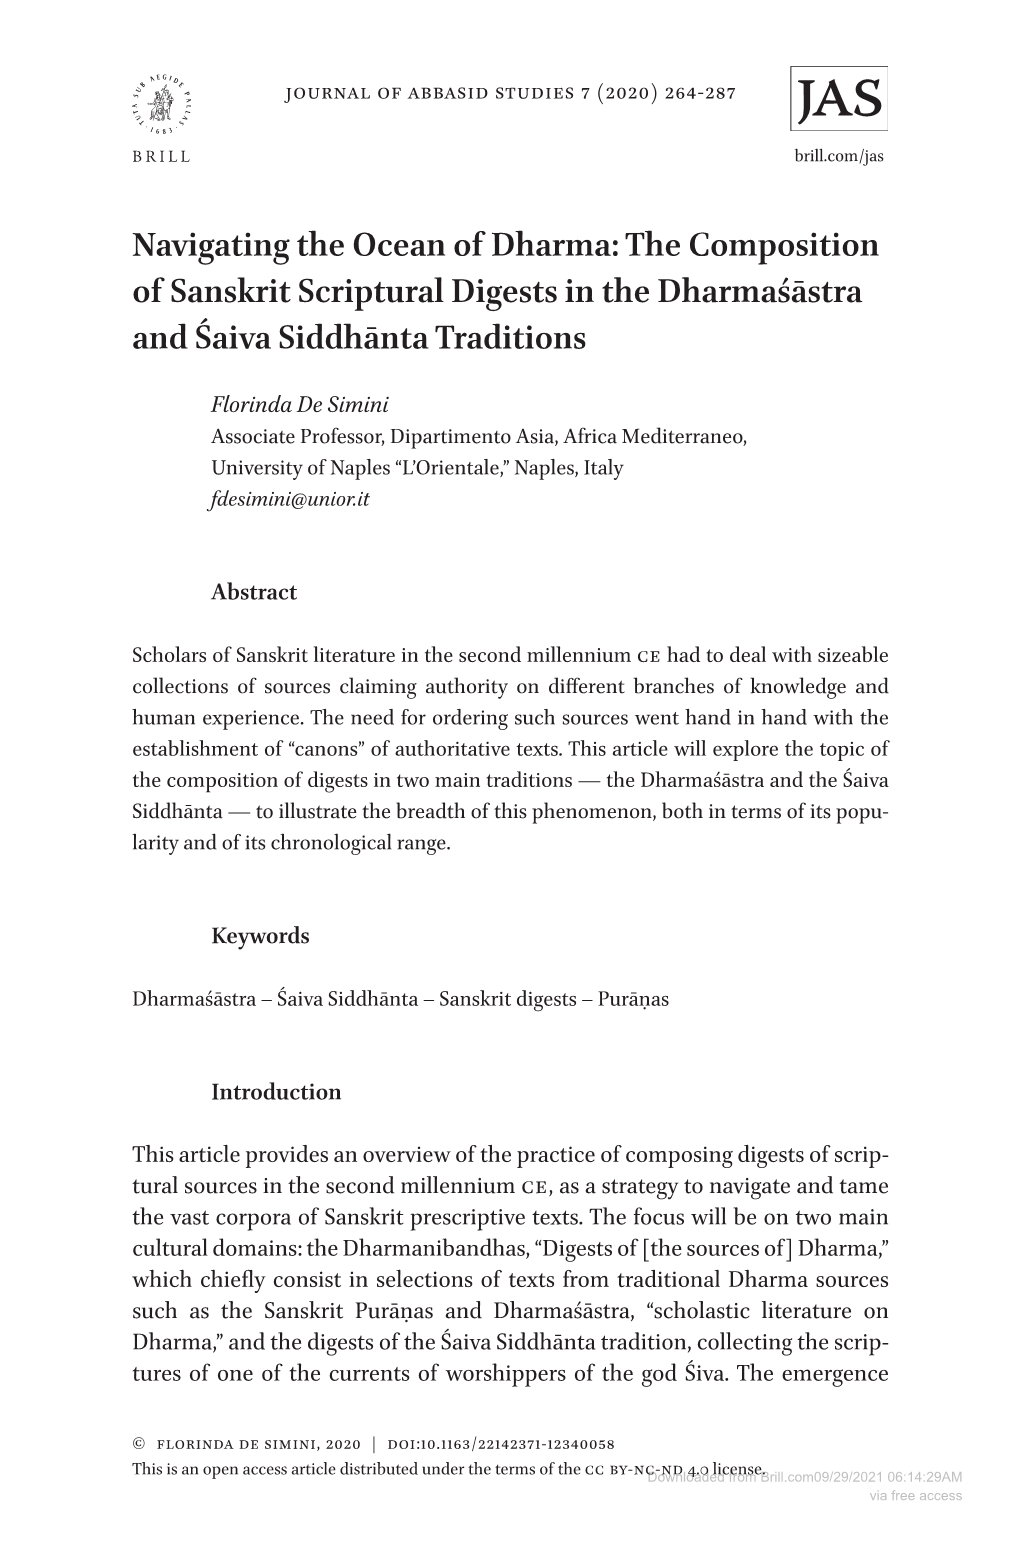 Navigating the Ocean of Dharma: the Composition of Sanskrit Scriptural Digests in the Dharmaśāstra and Śaiva Siddhānta Traditions